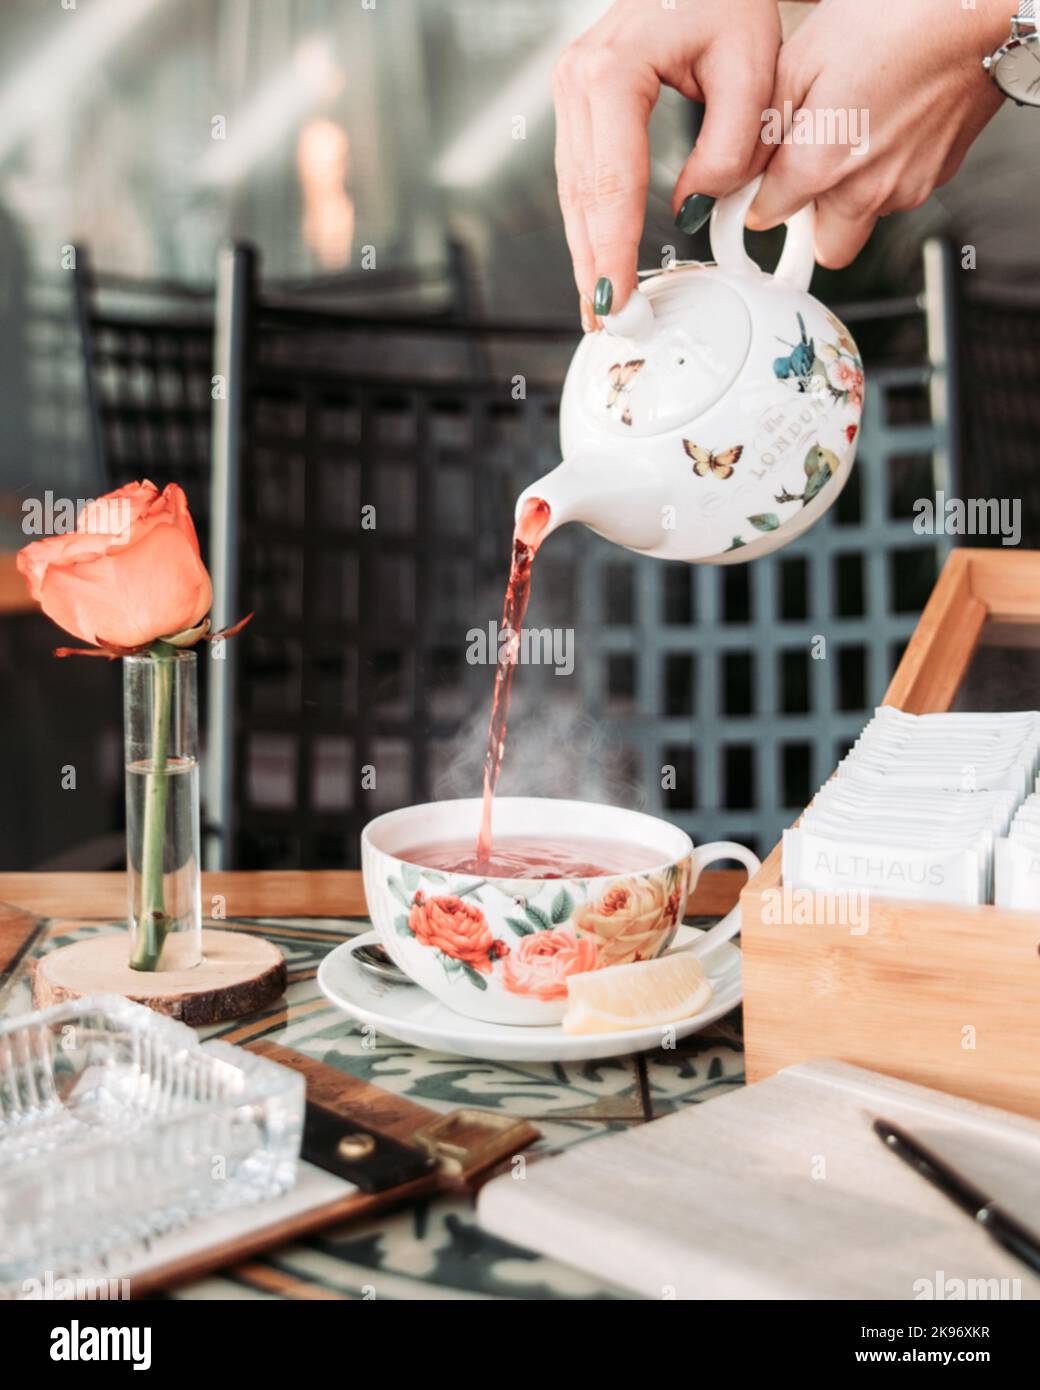 Serving fresh tea in vintage crockery at the cafe Stock Photo